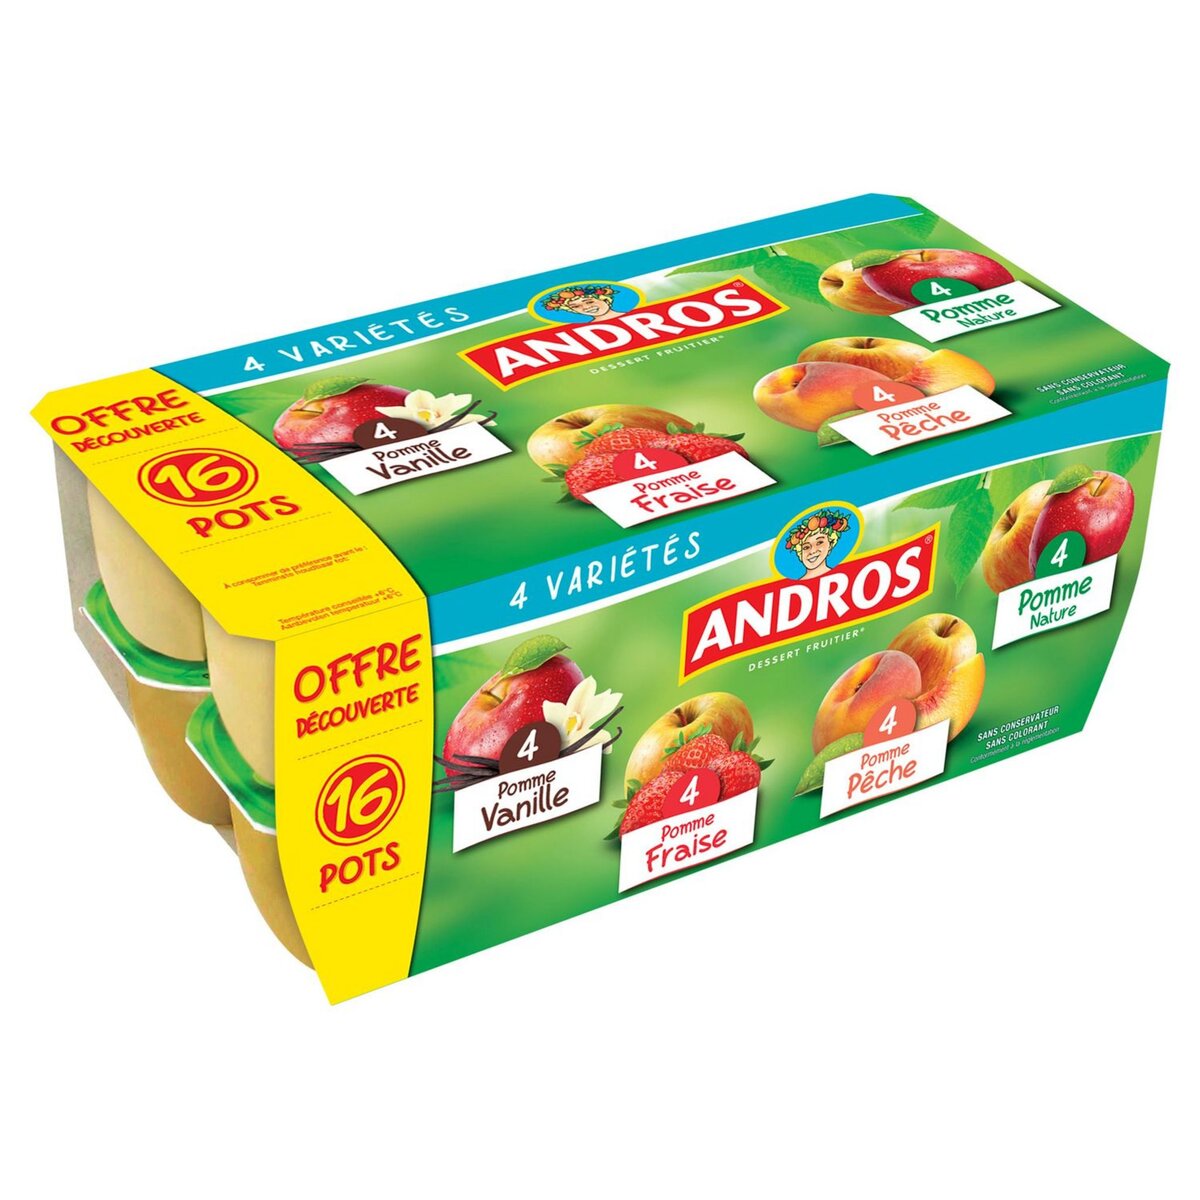 ANDROS Andros compote pomme, vanille, fraise, pêche16x100g offre découverte